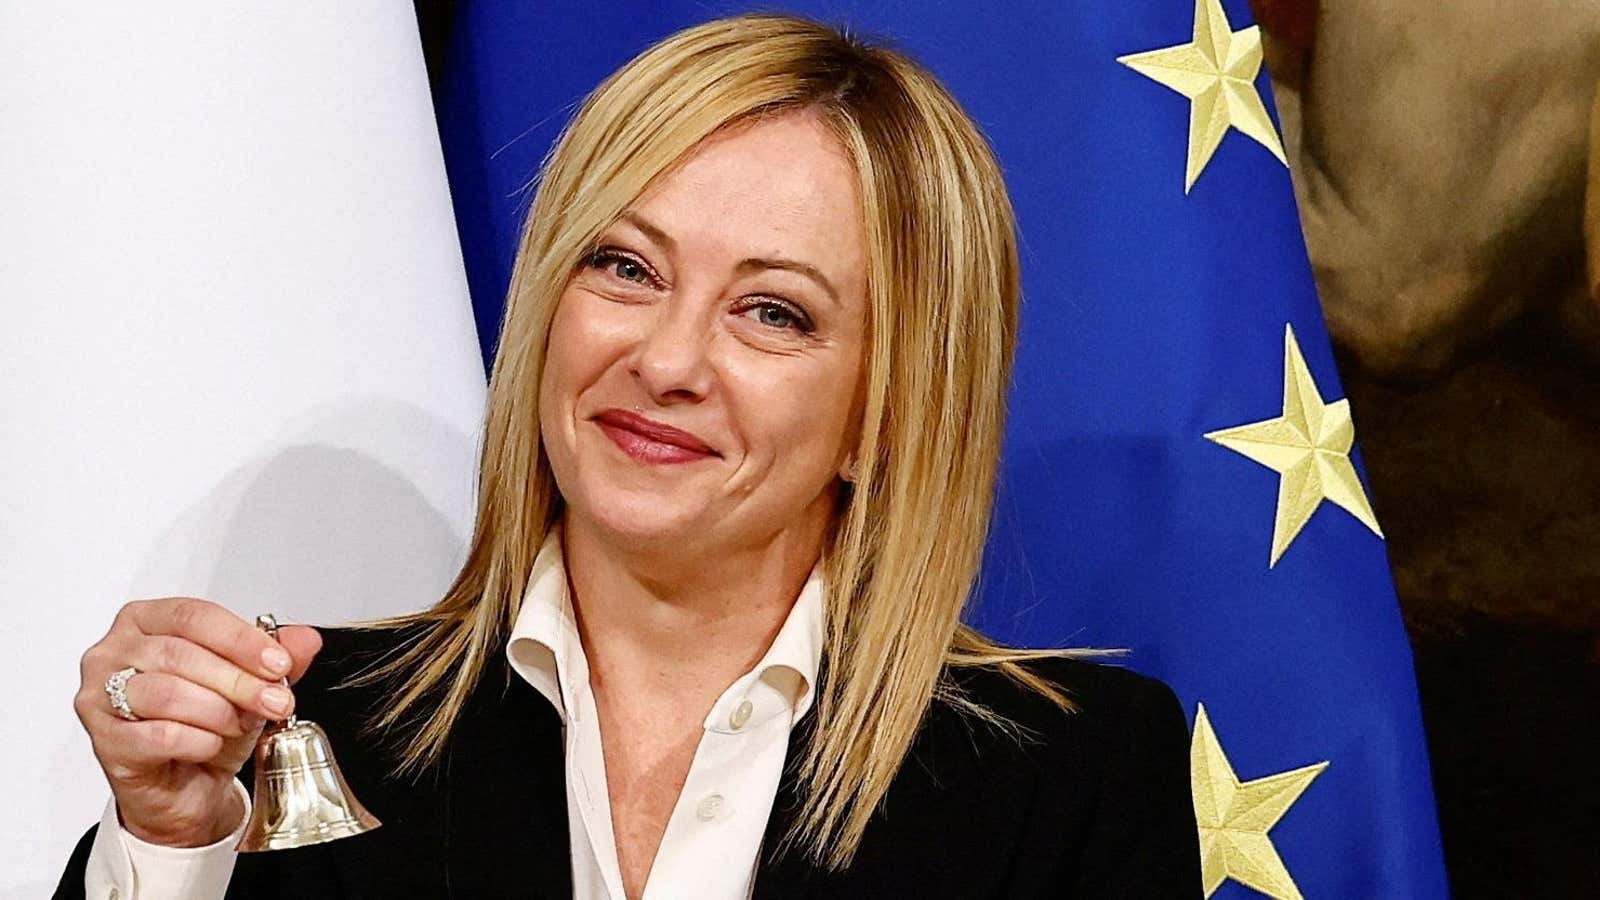 Italy's first female prime minister will use the masculine form of her title